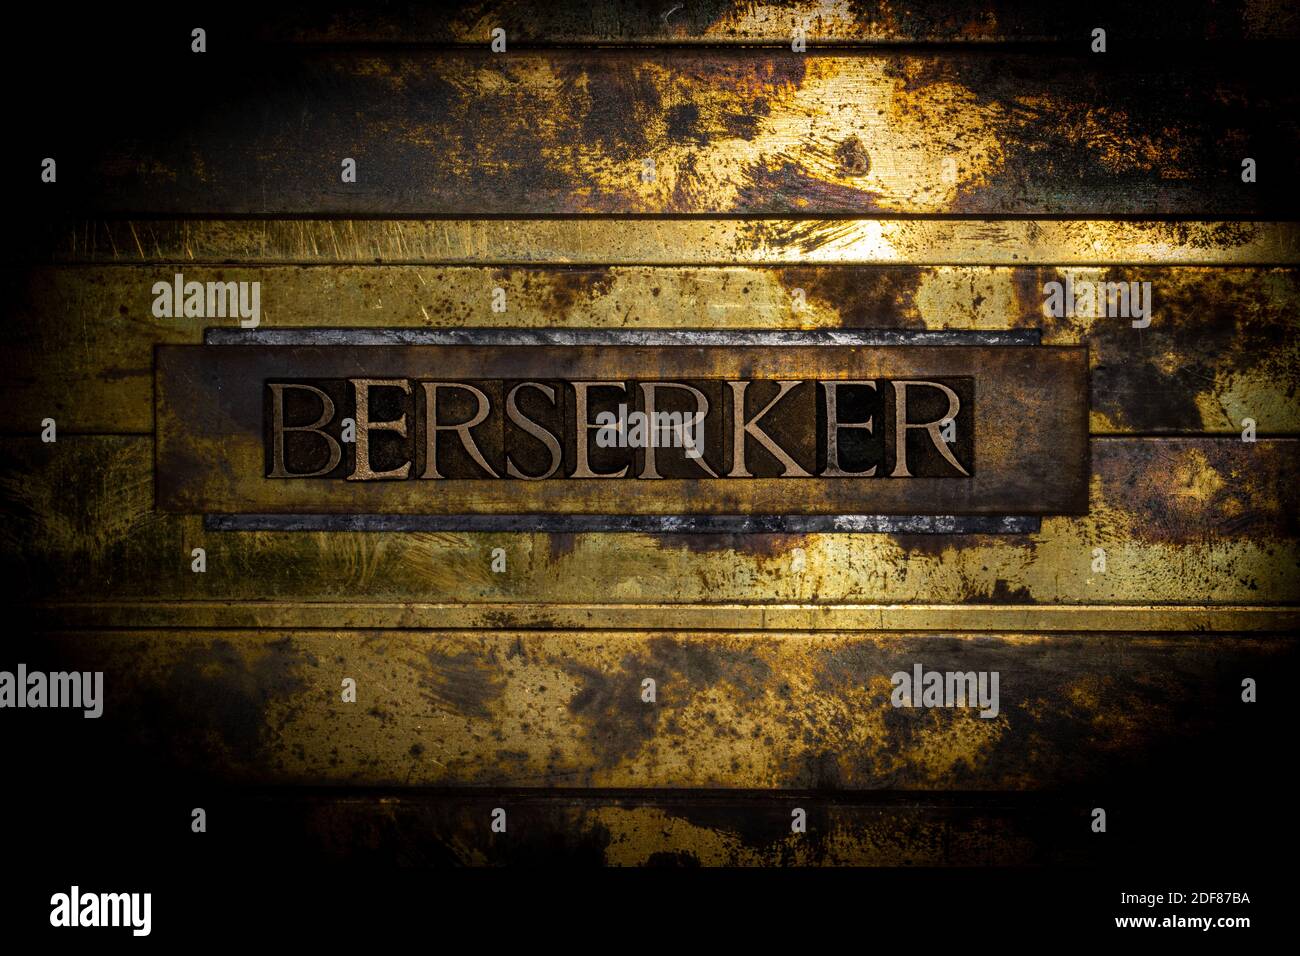 Berserker text formed by real authentic typeset letters on vintage textured grunge bronze background Stock Photo